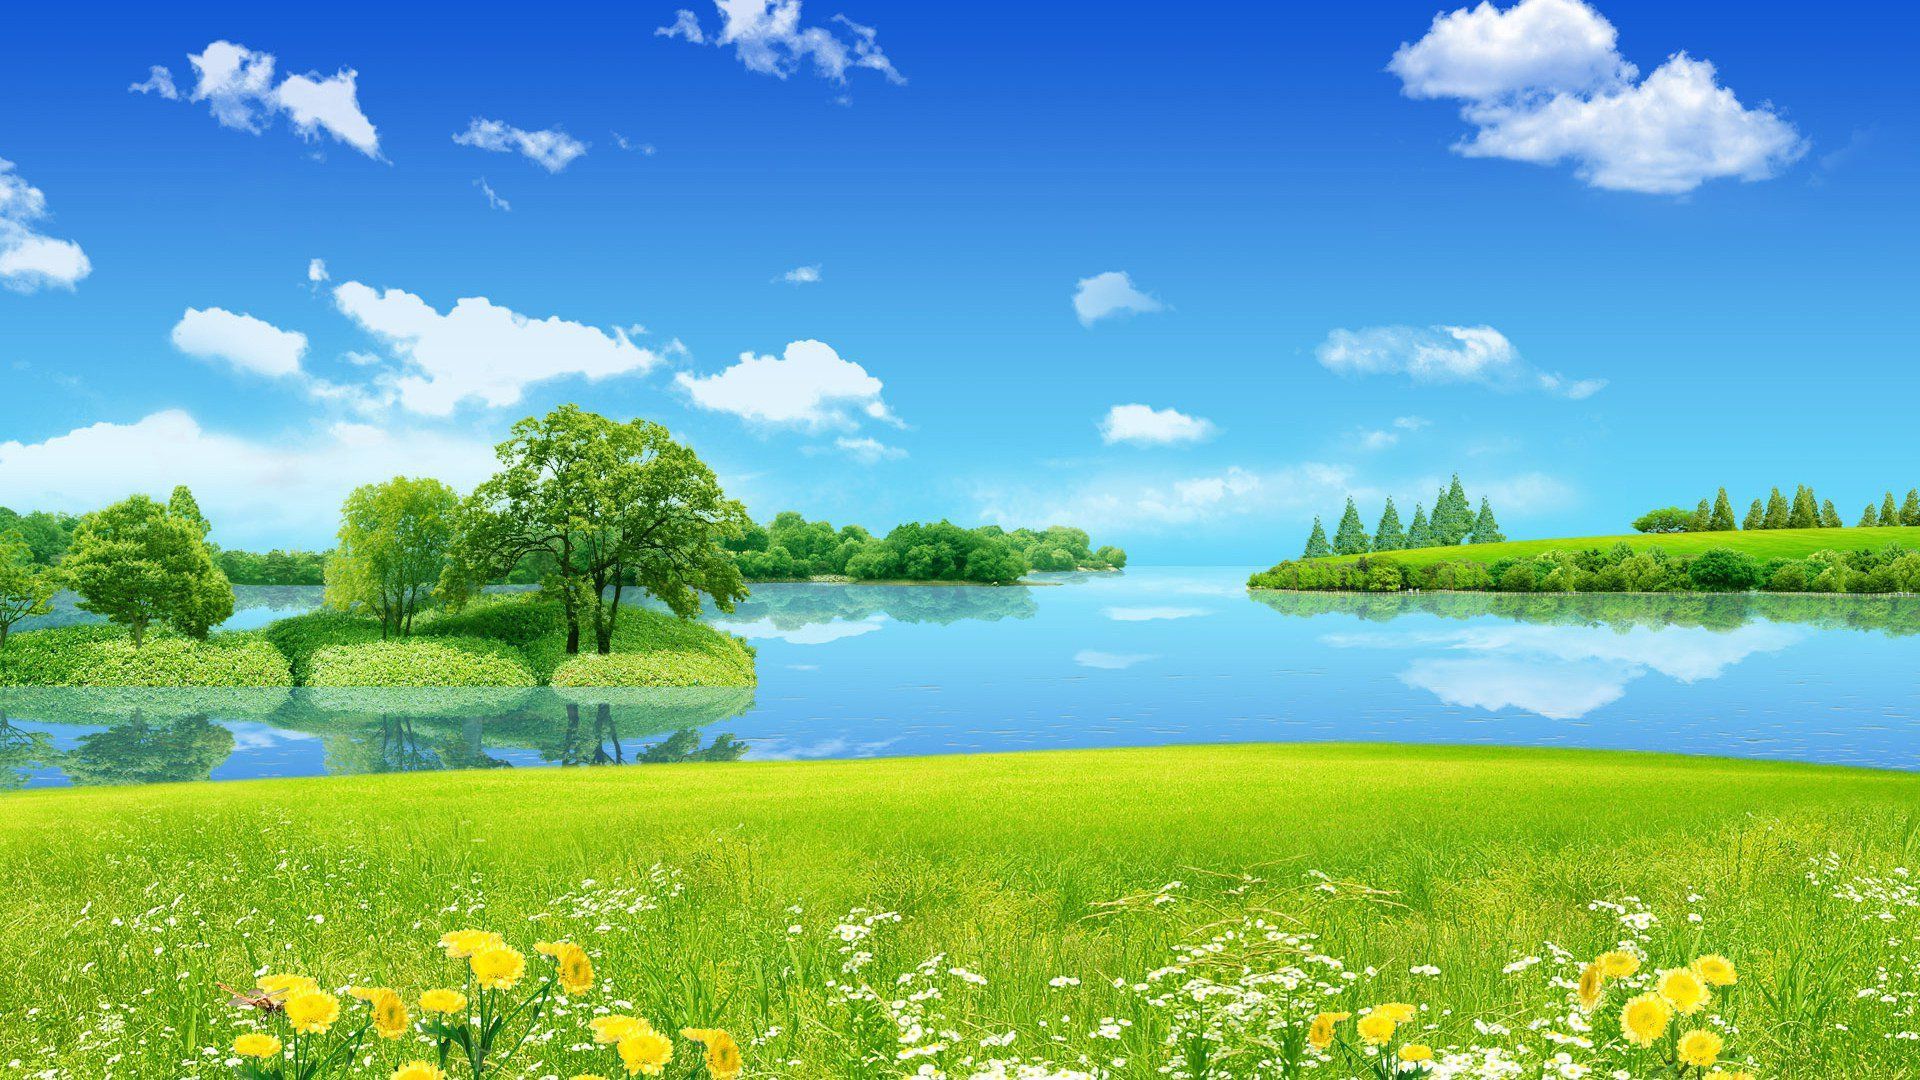 Sunny Spring Day Wallpaper. Beautiful nature wallpaper hd, Nature wallpaper, Nature photography